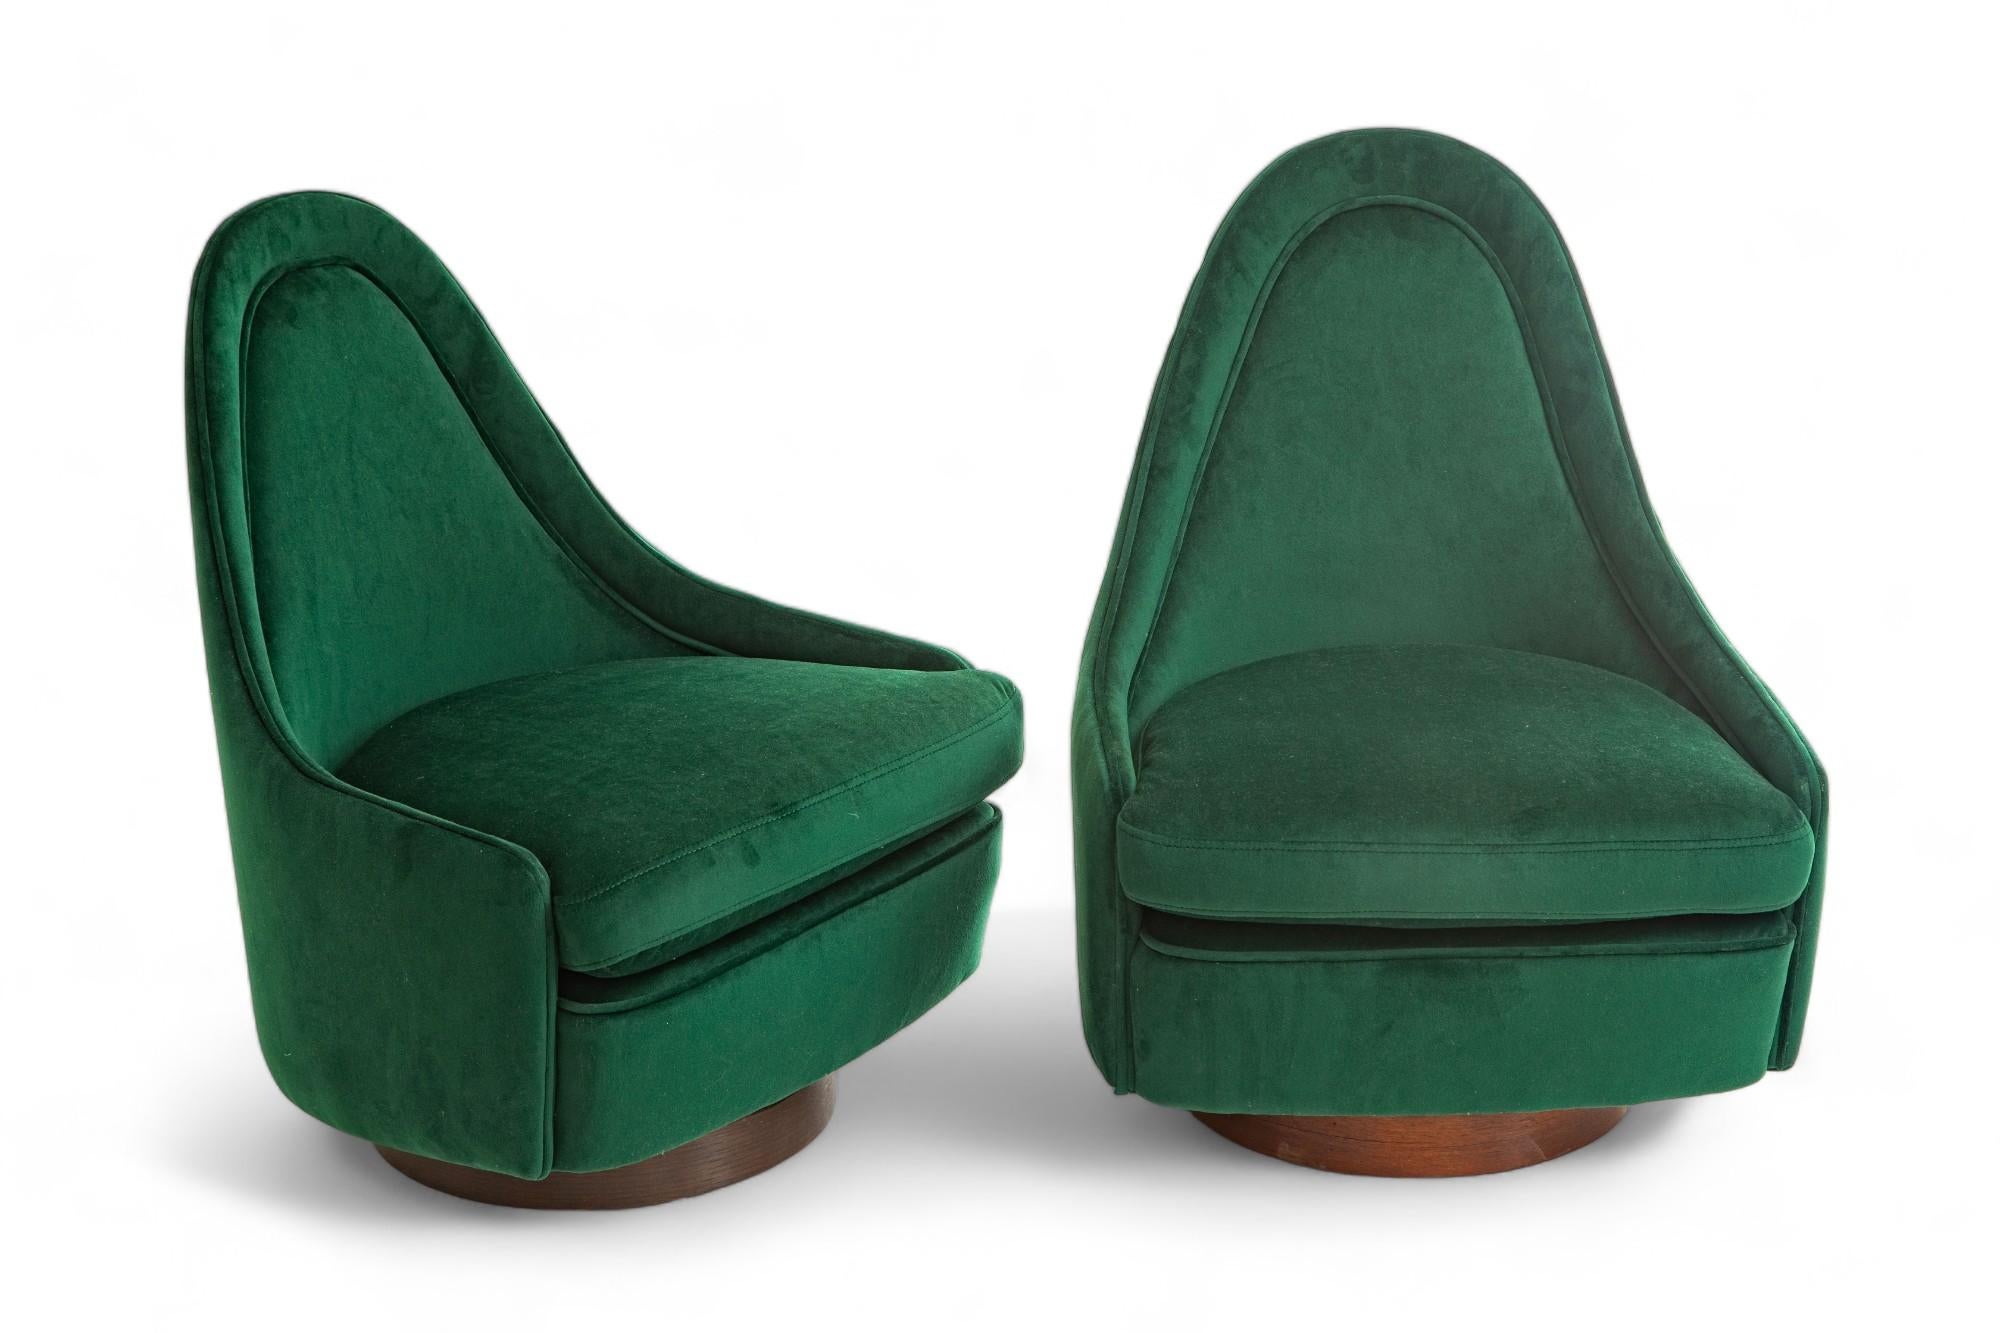 Pair of Mid-Century Modern petite tilt and swivel lounge chairs 
by Milo Baughman for Thayer Coggin
Sculptural teardrop back on a walnut base
Newly upholstered with an emerald green velvet
4 available, priced per pair
Available to view in-situ in